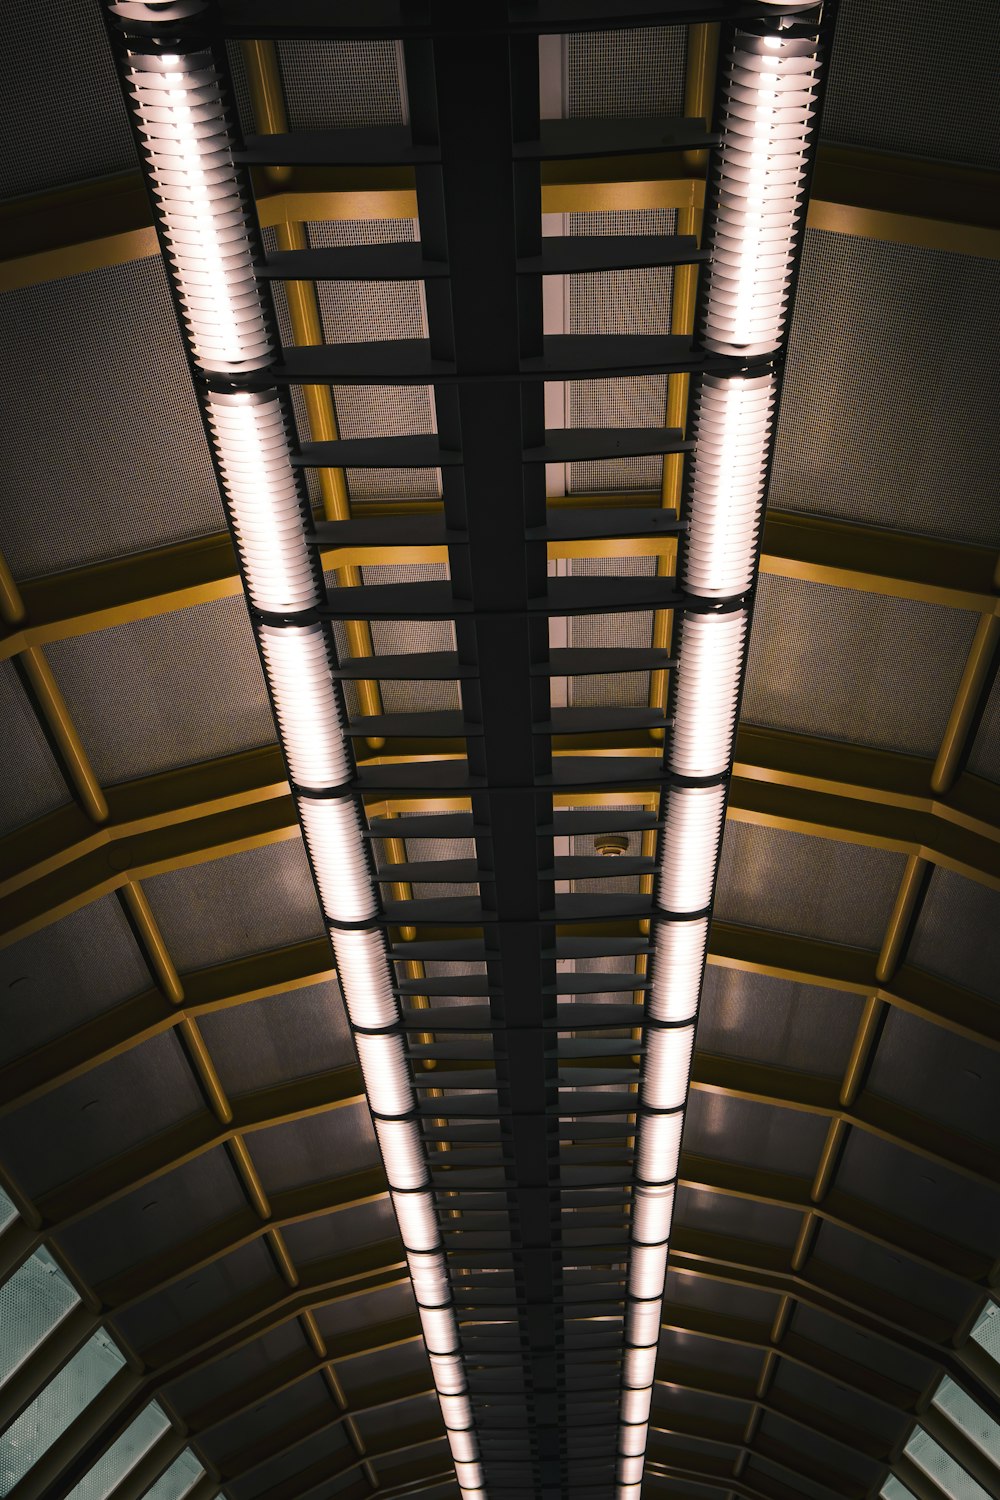 the ceiling of a train station is lit up